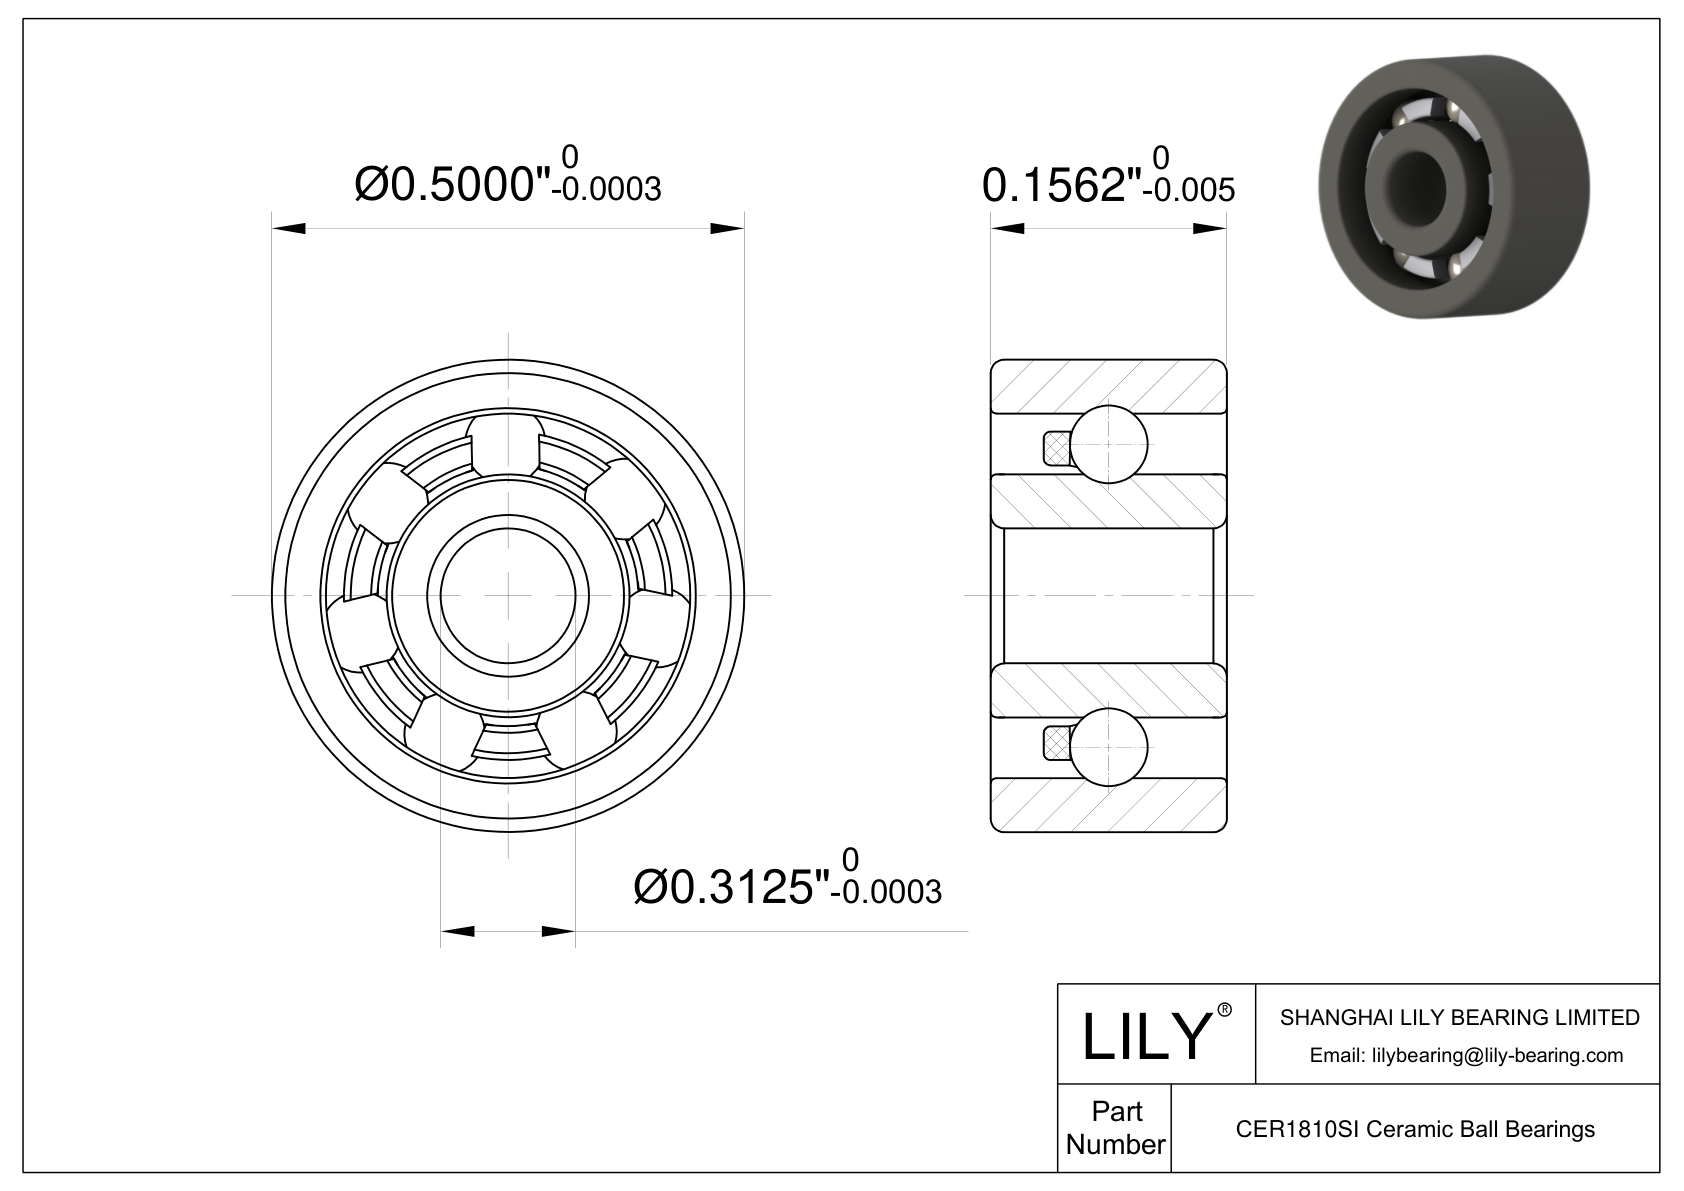 CESI R1810 Inch Size Silicon Nitride Ceramic Bearings cad drawing